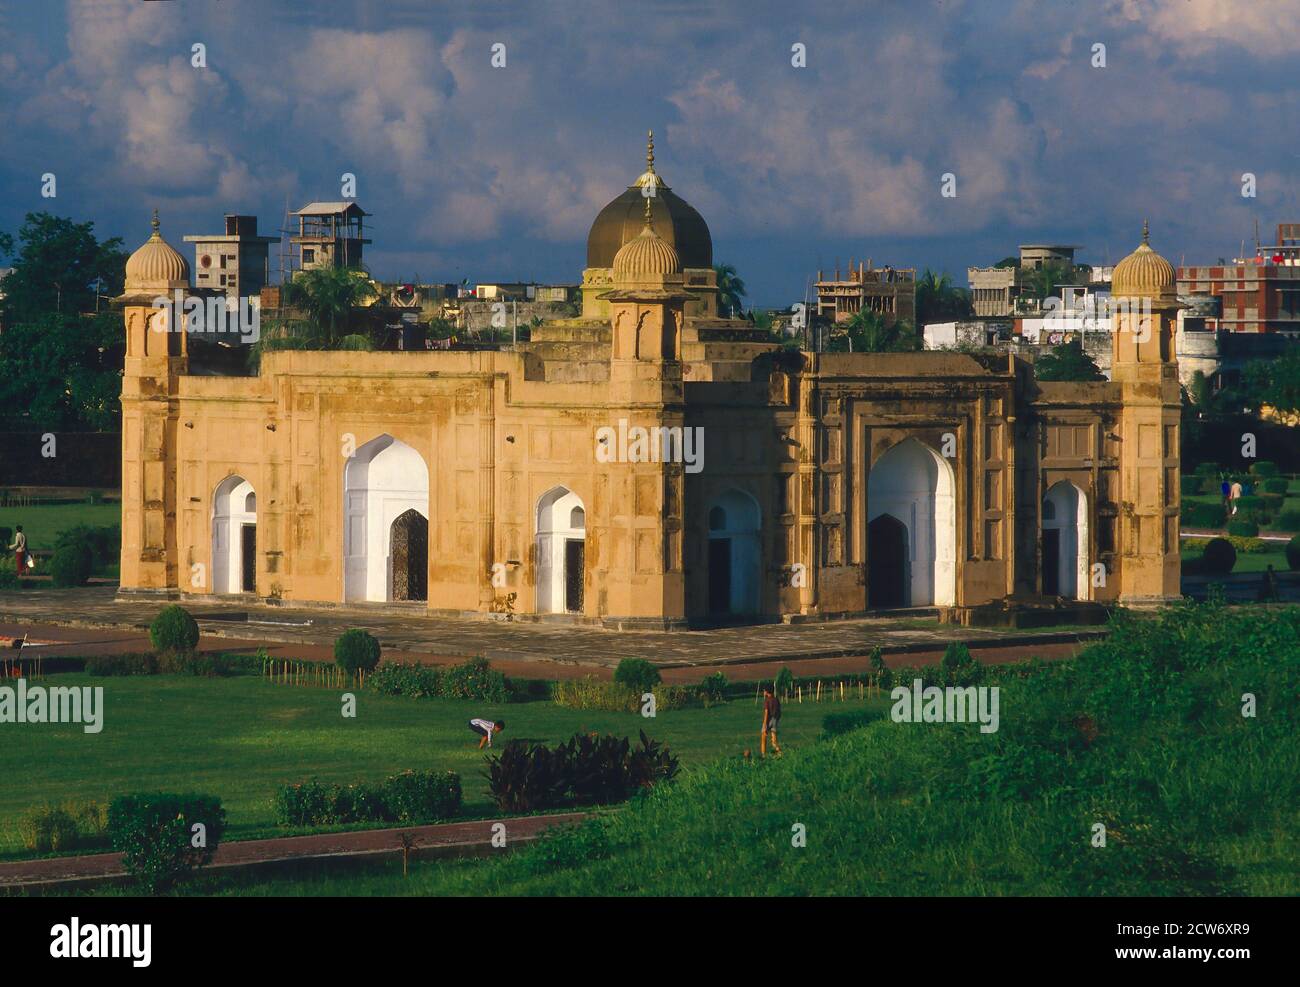 Lalbagh-Fort, Dhaka, Bangladesh. built in the 17th century. Stock Photo